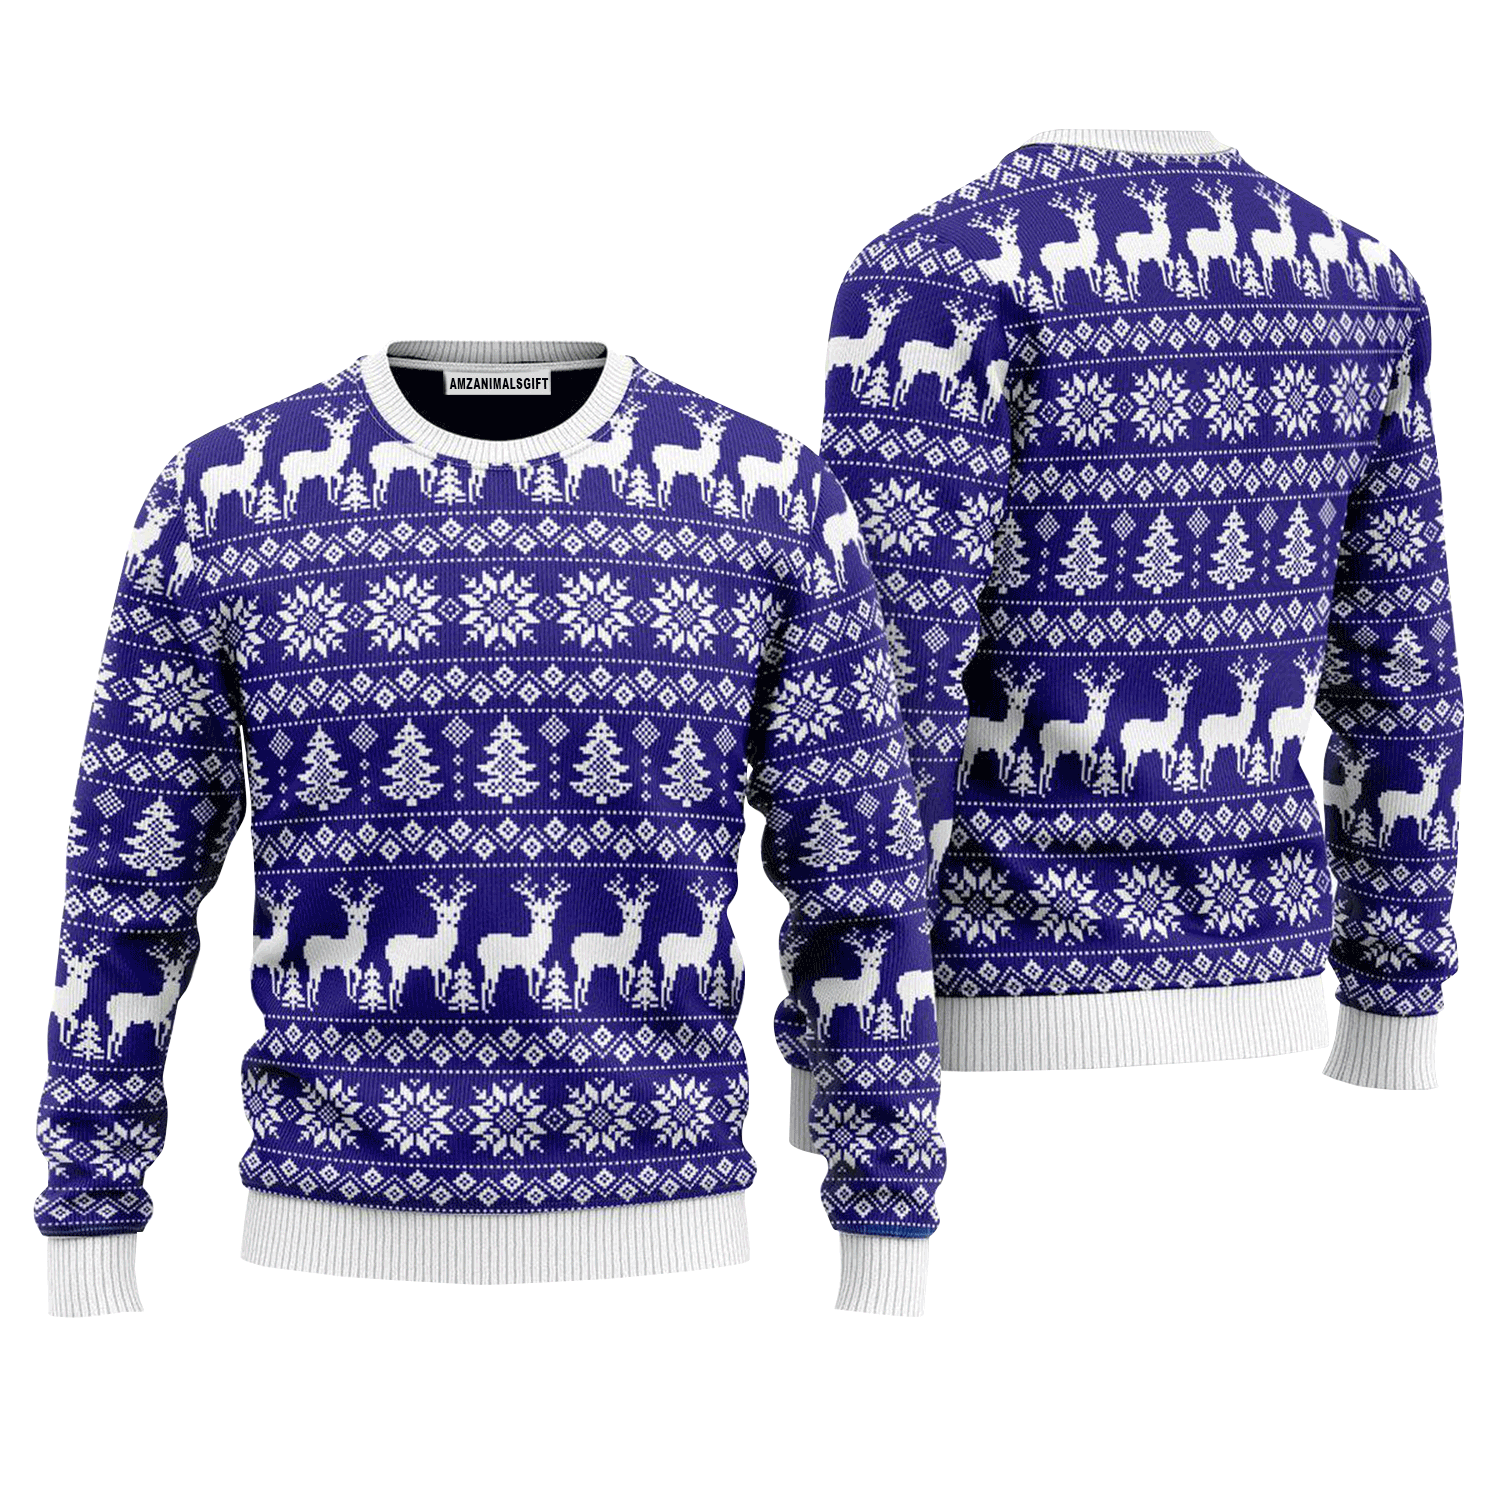 Make It Rein Deer Pattern Sweater, Ugly Sweater For Men & Women, Perfect Outfit For Christmas New Year Autumn Winter